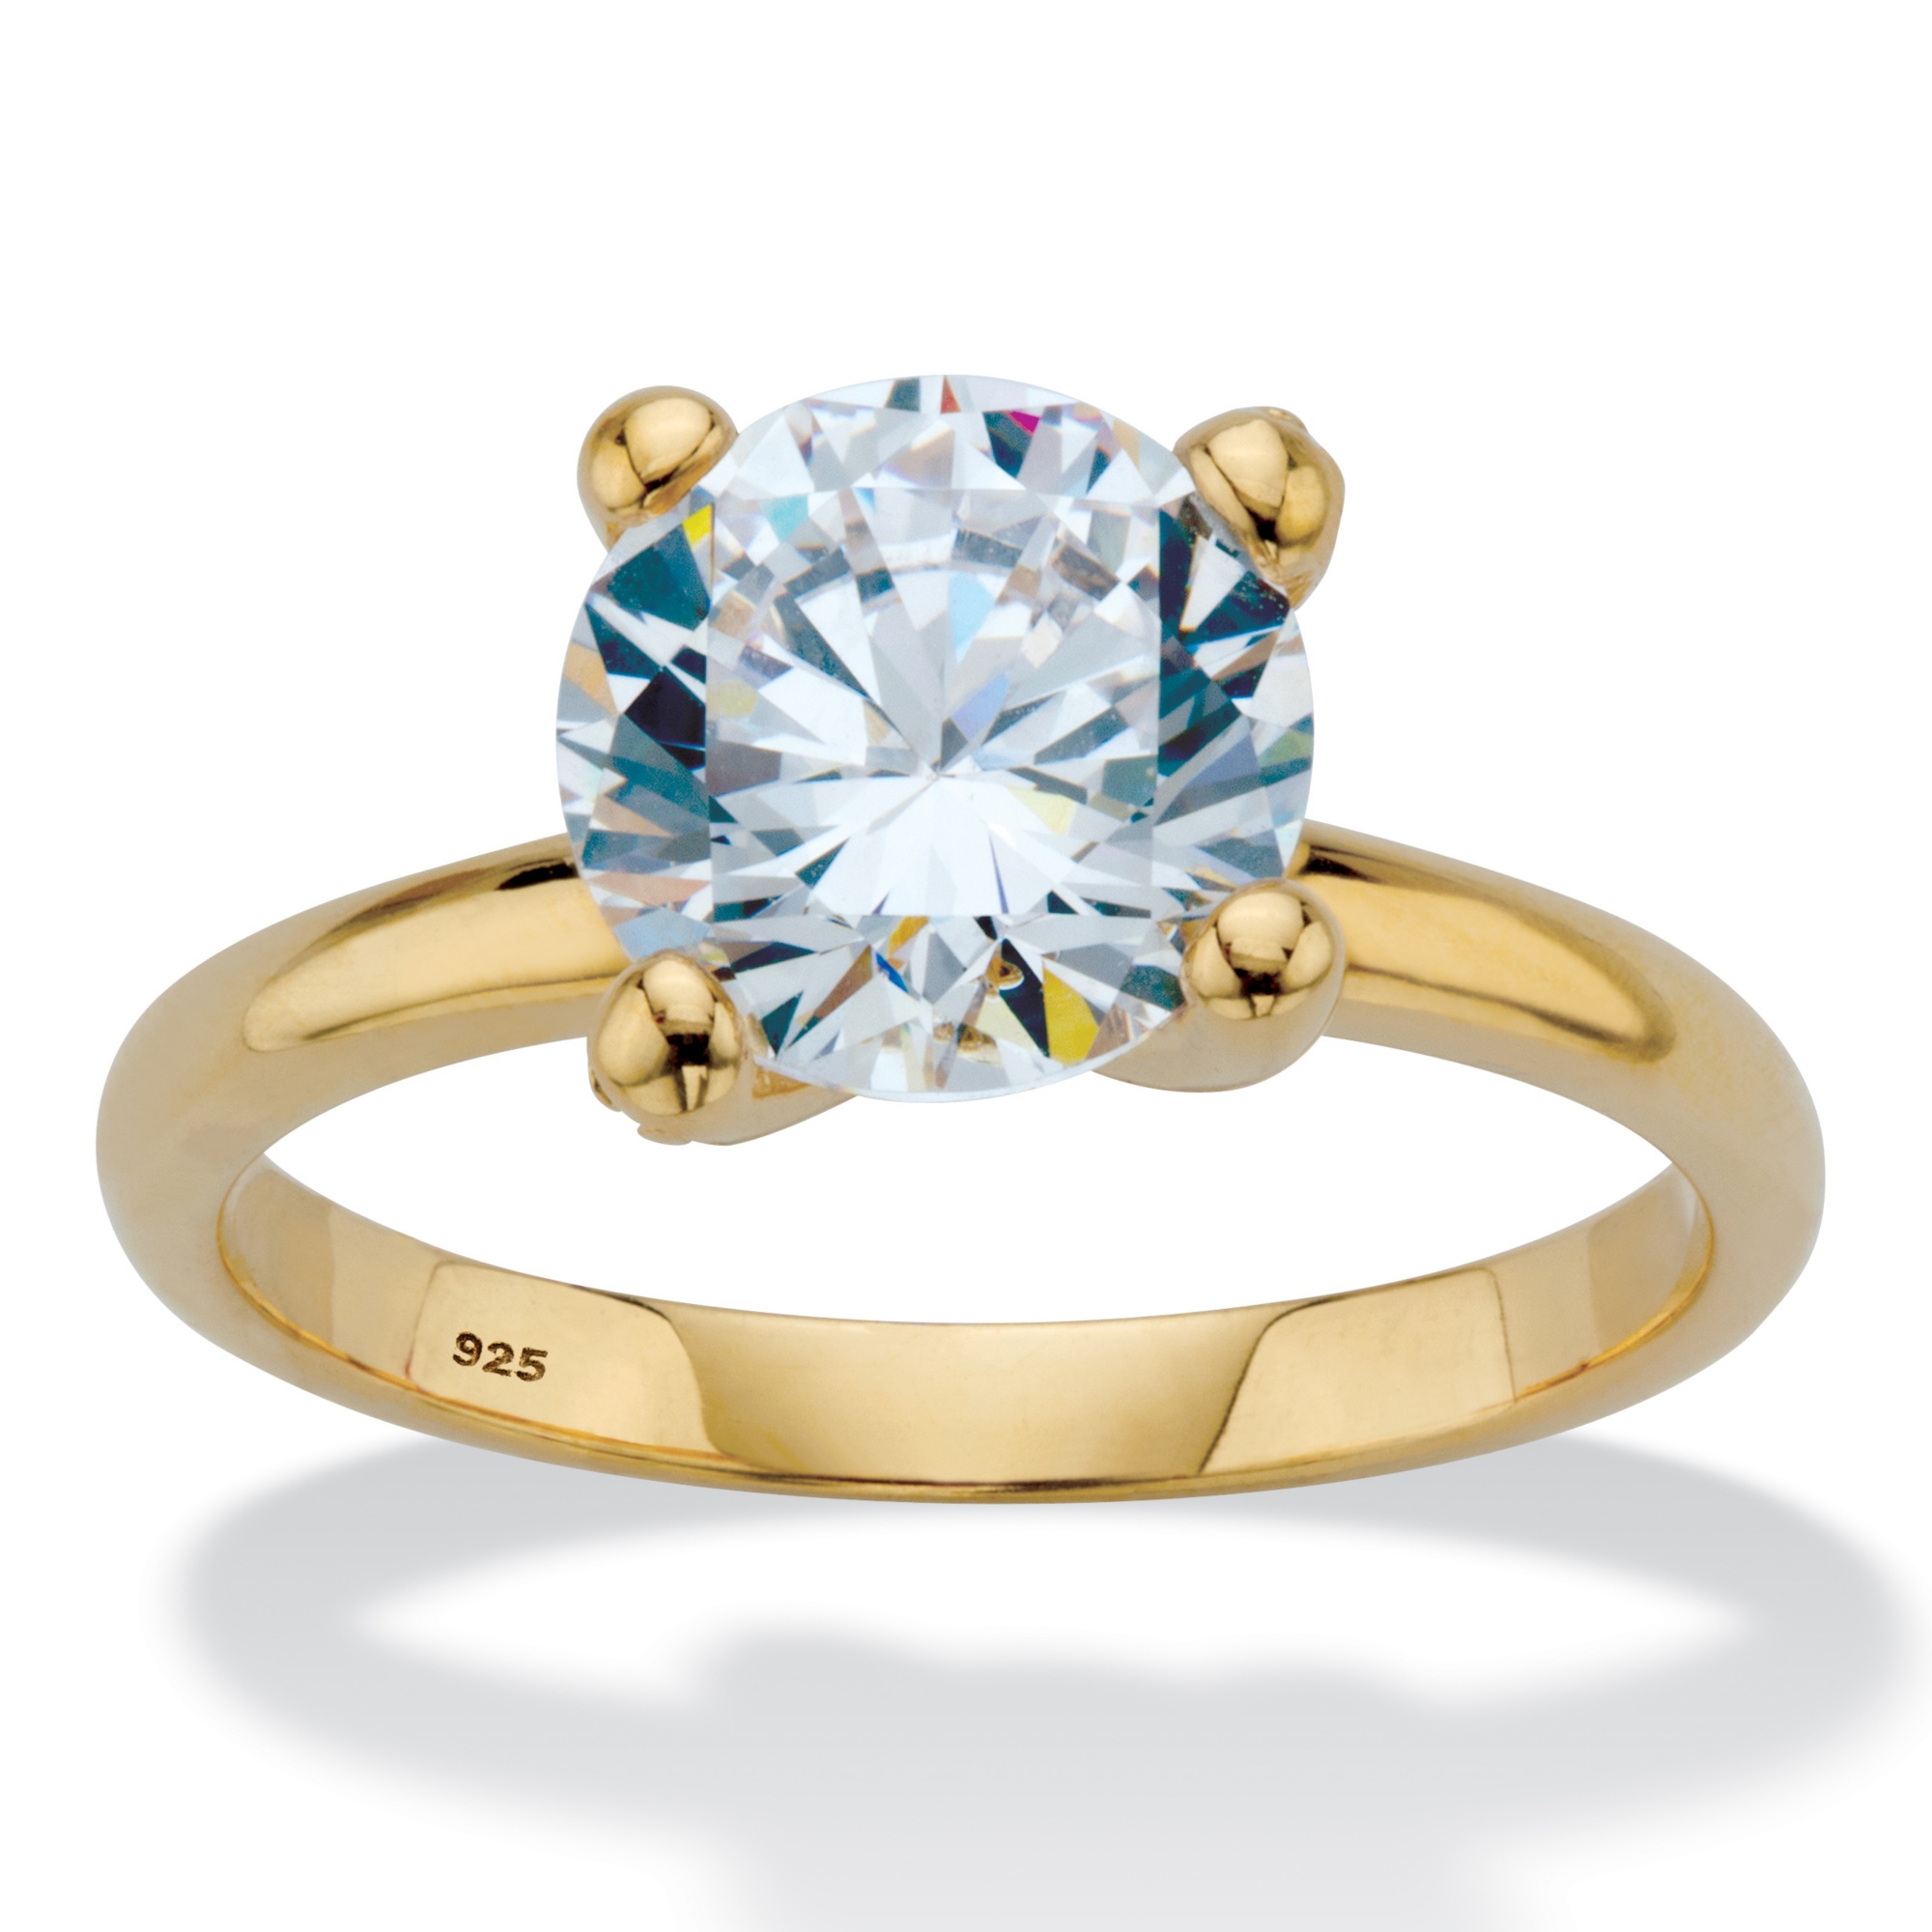 Round Cubic Zirconia Solitaire Engagement Ring Tcw In K Gold Over Sterling Silver At